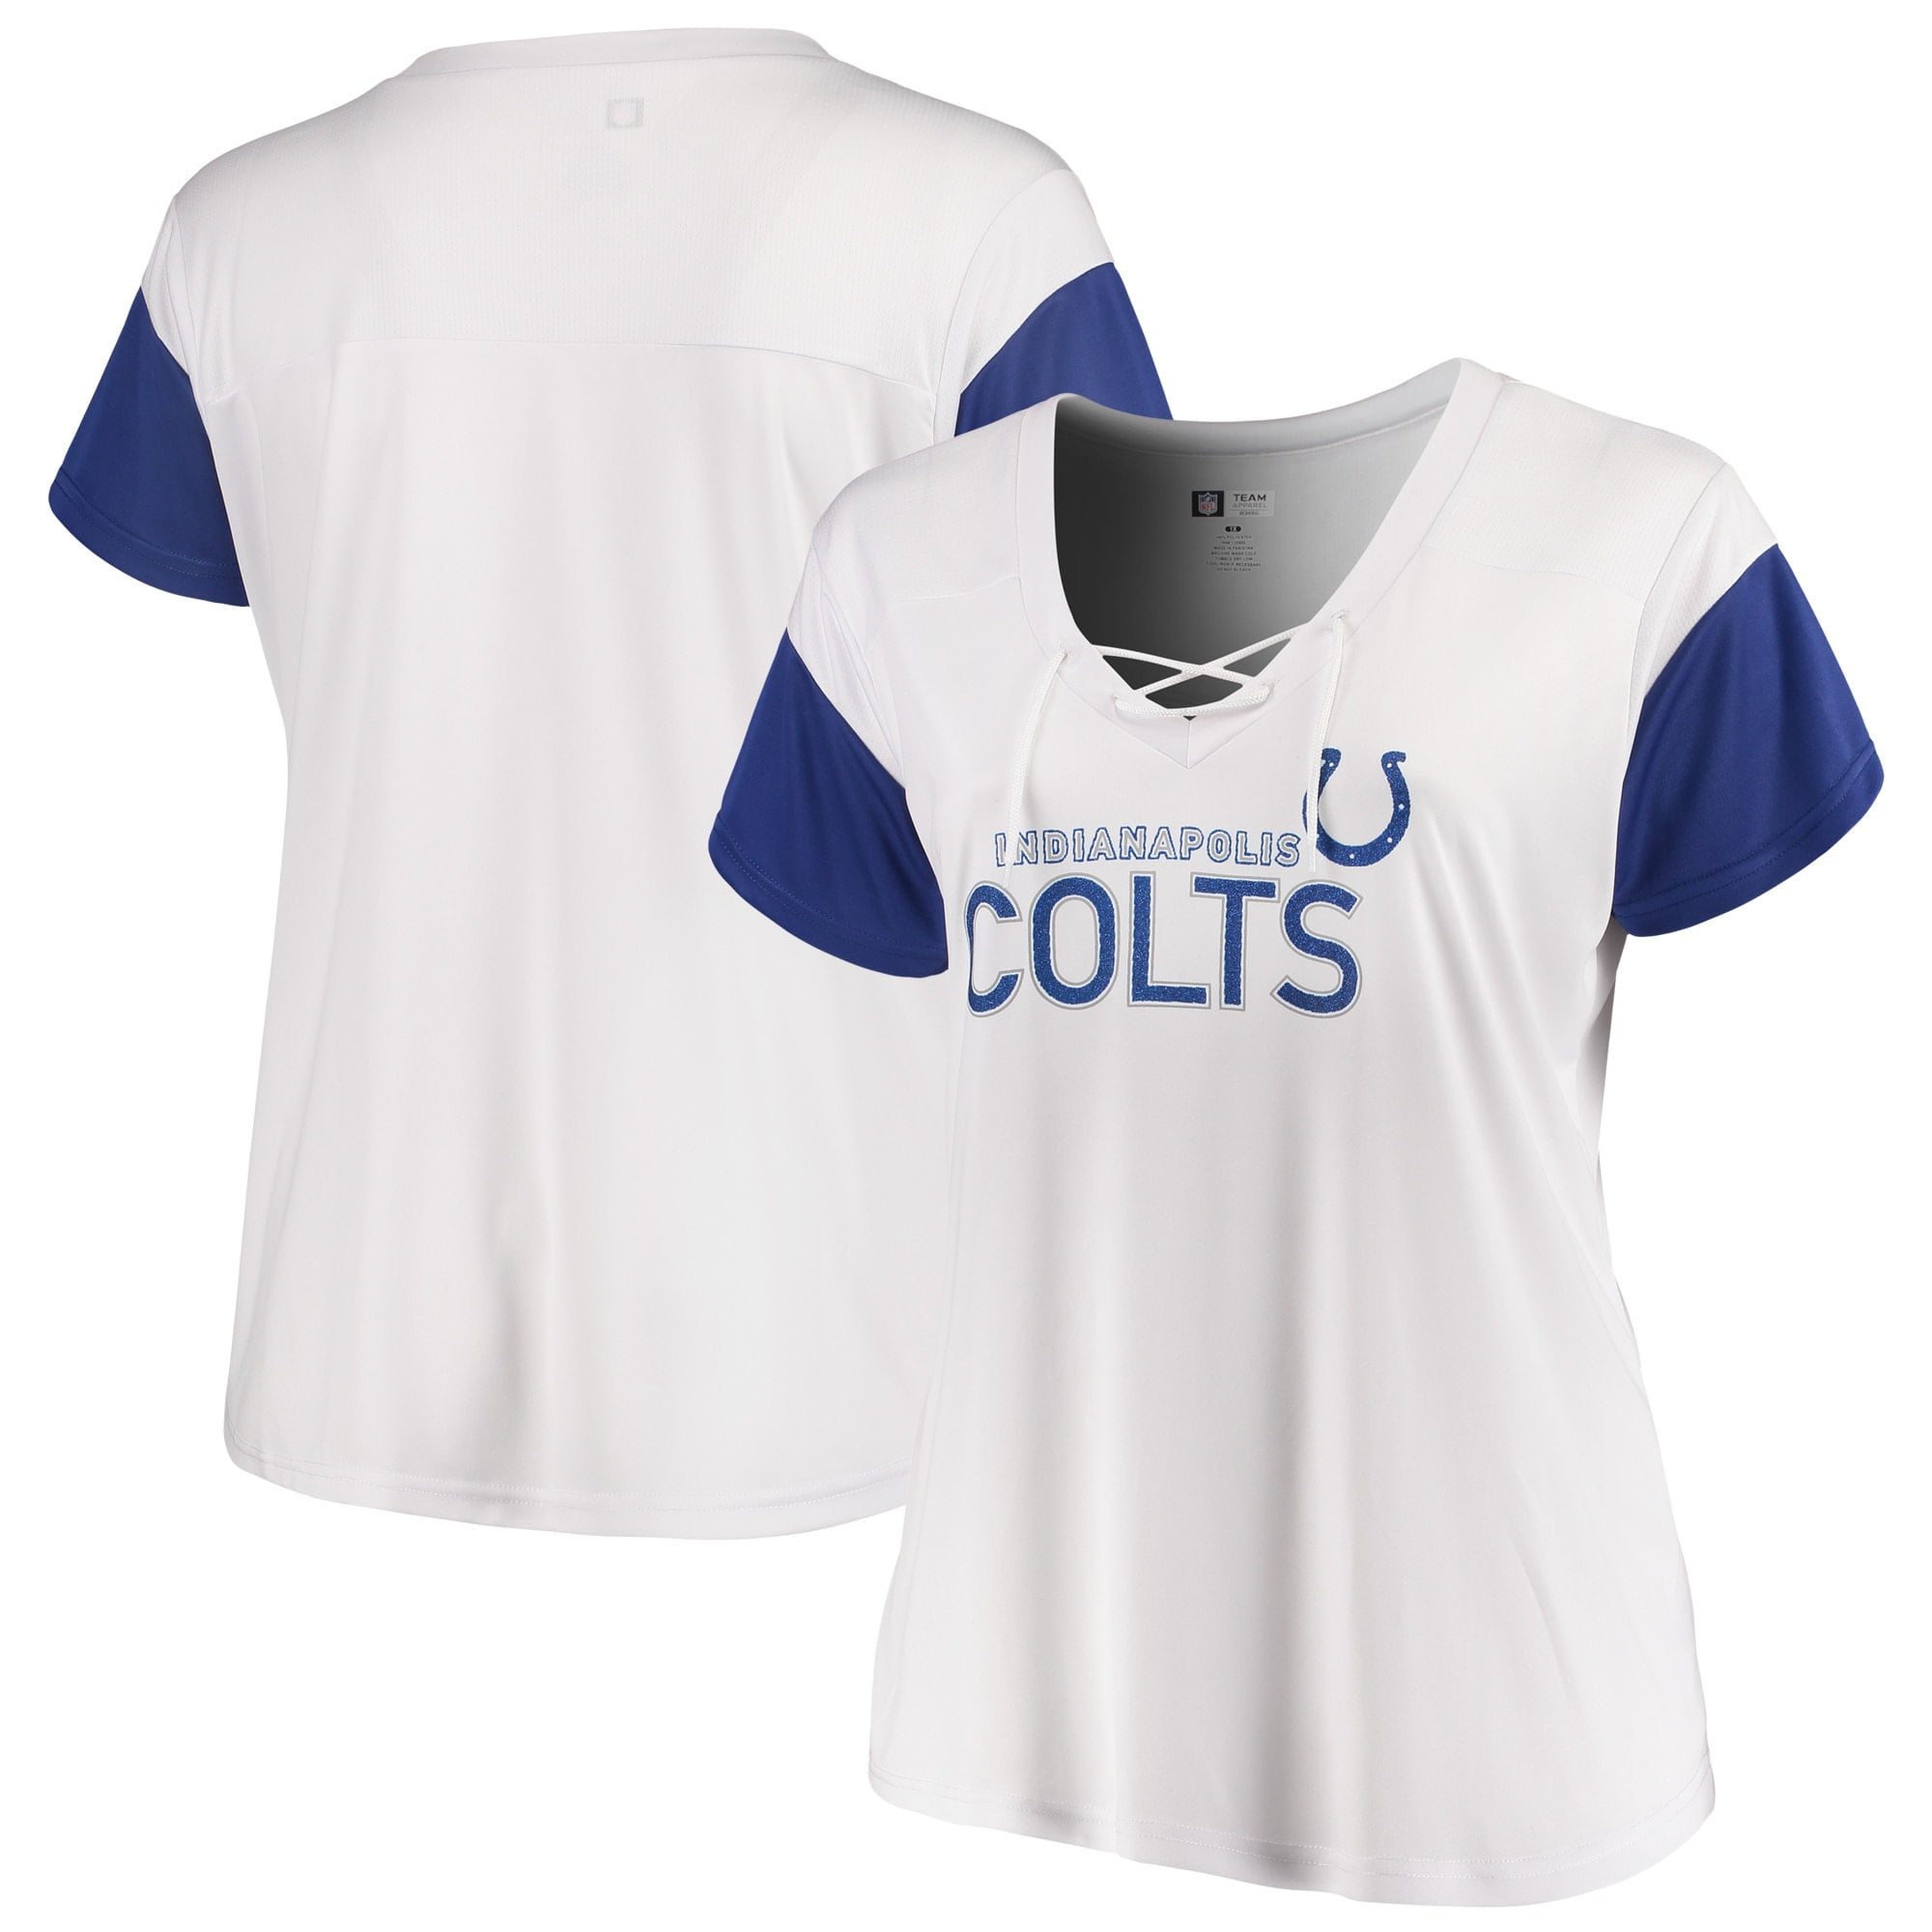 Indianapolis Colts Majestic Women's Lace-Up V-Neck T-Shirt - White ...